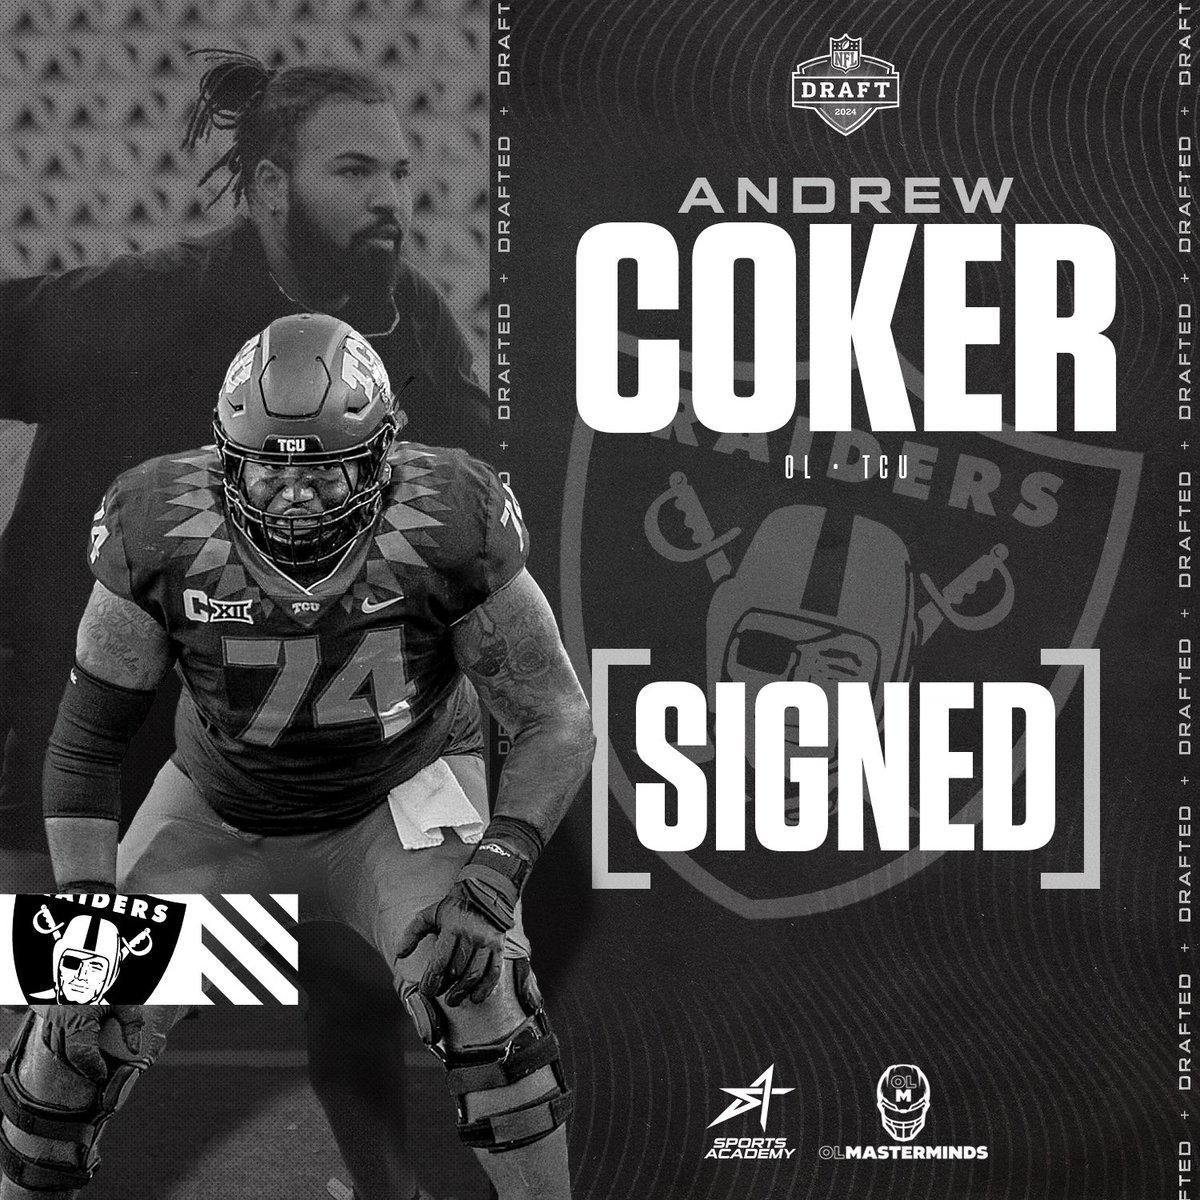 Congratulations on signing with the @Raiders, Andrew! ☠️ #OLMasterminds #SportsAcademy